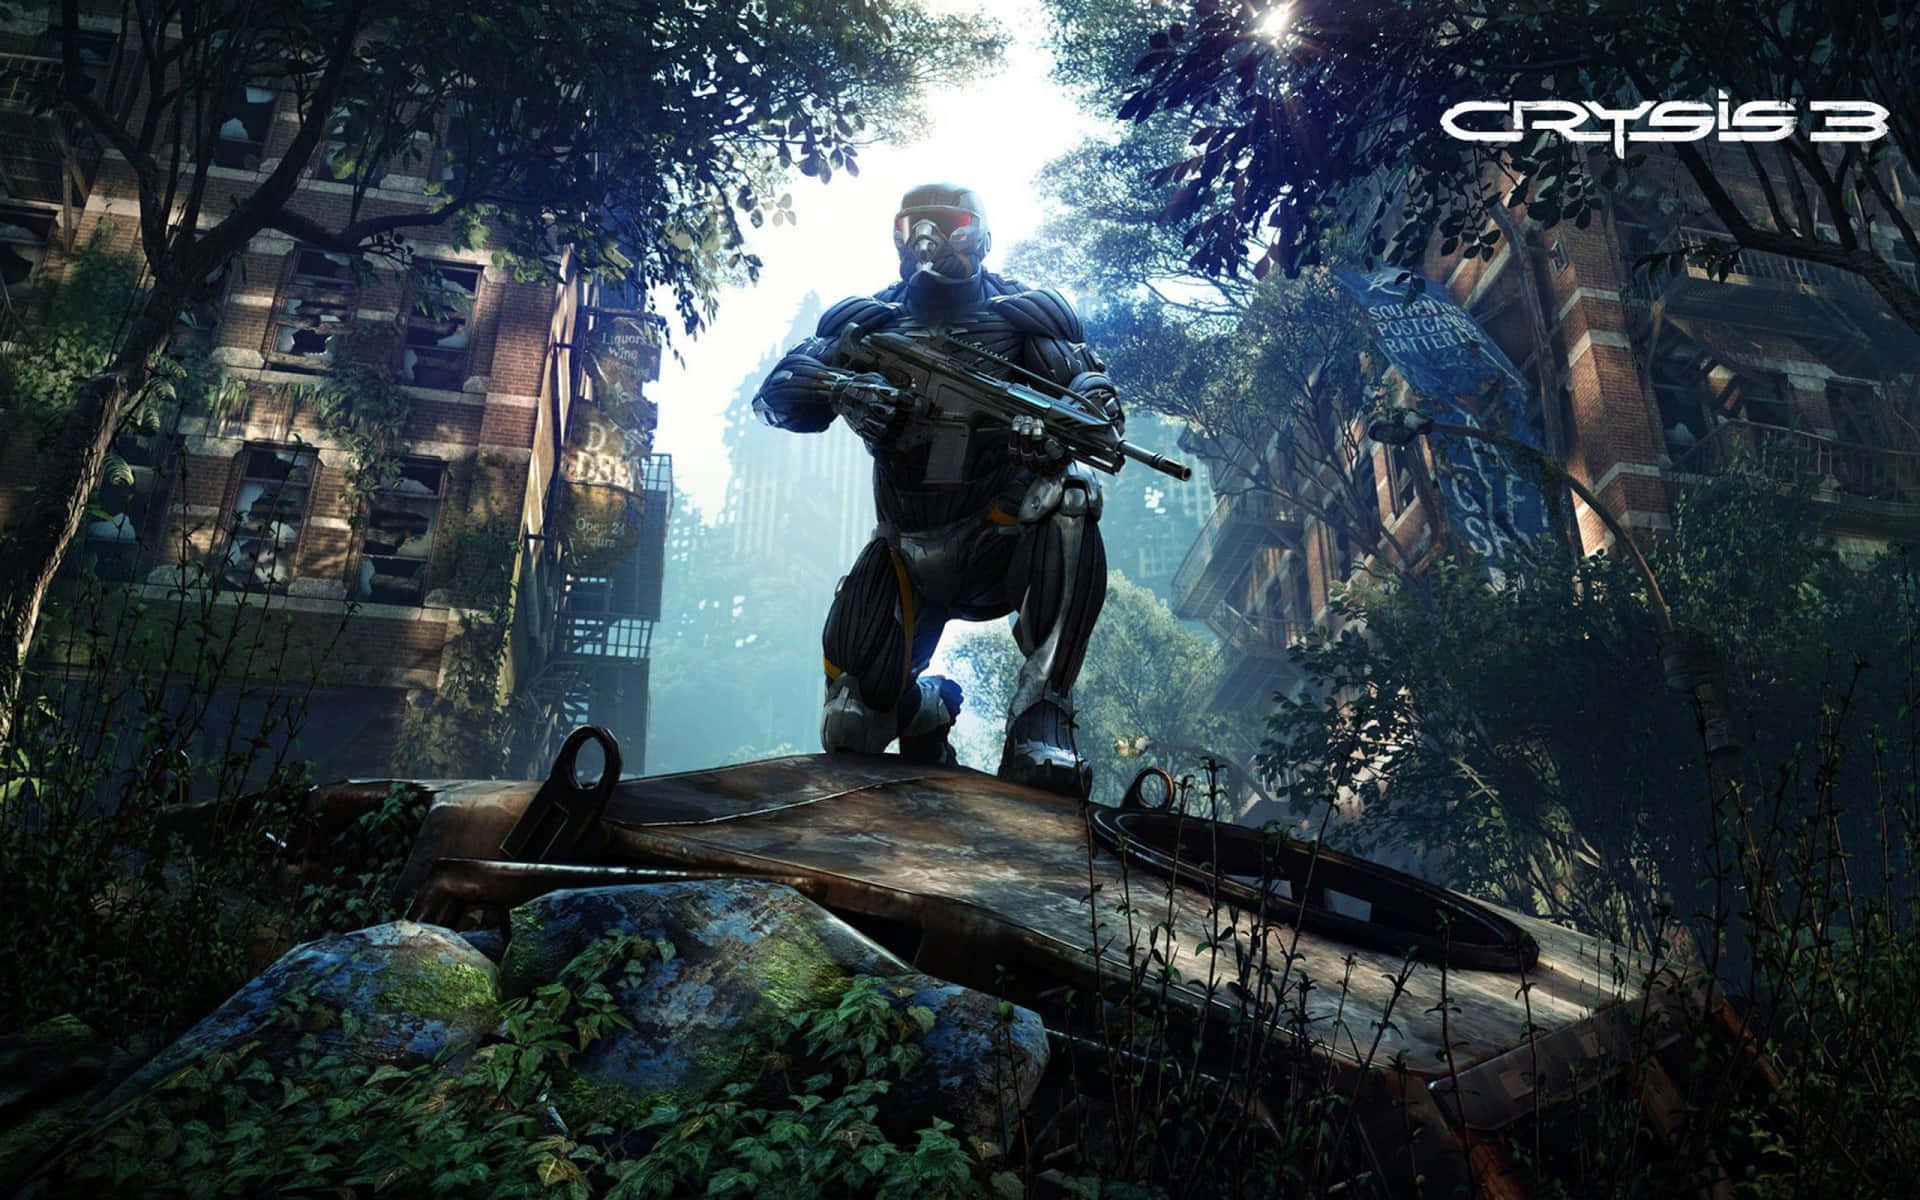 Witness the Action in Immersive 4K with Crysis Wallpaper